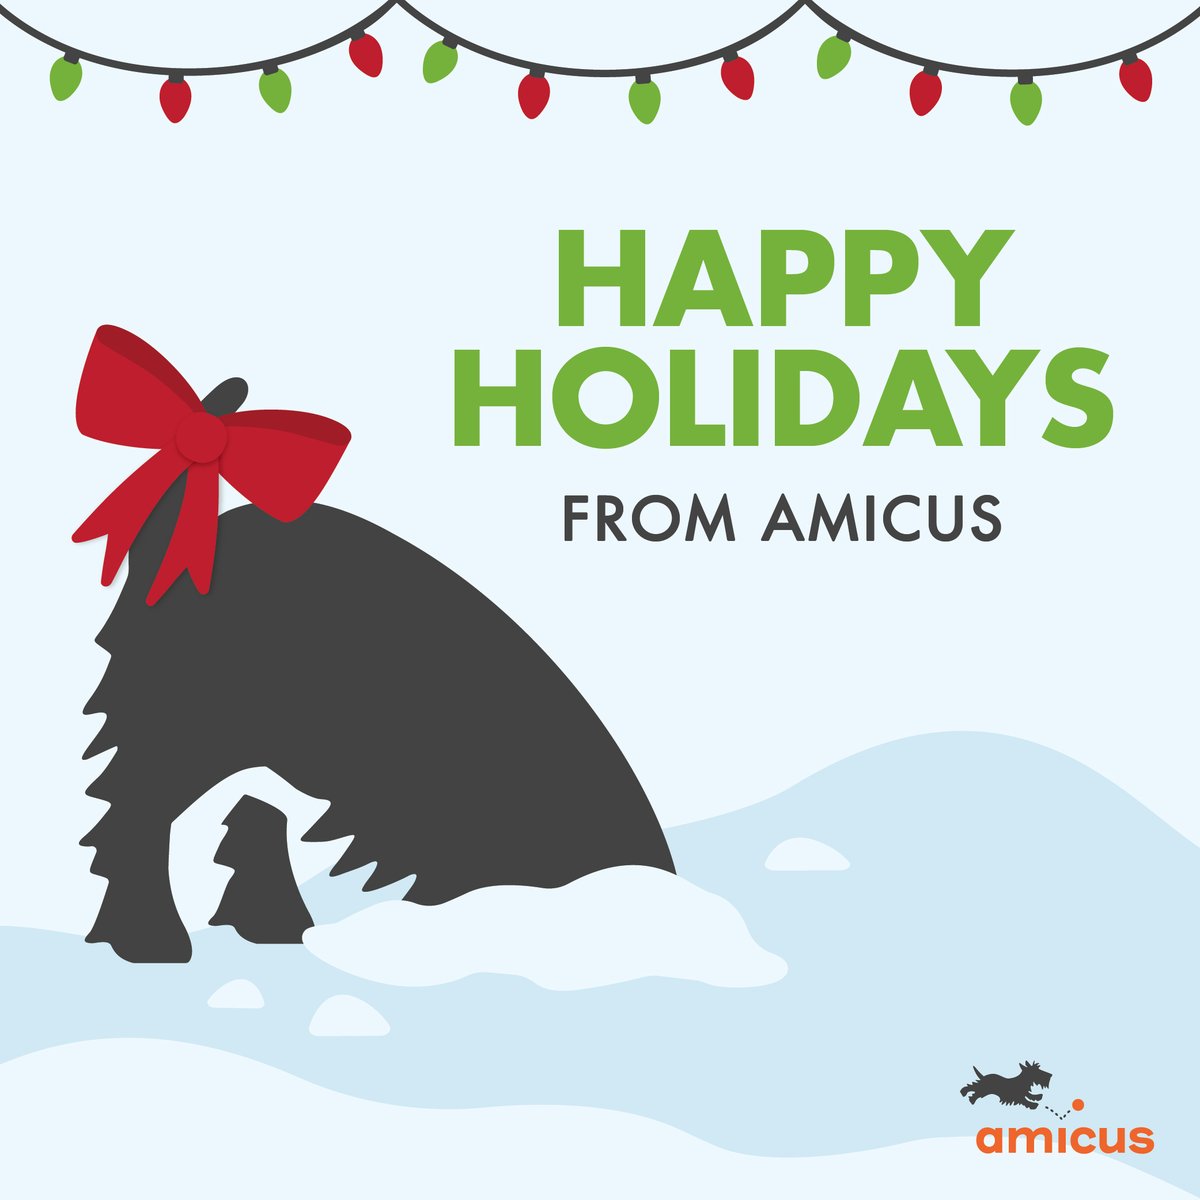 Sending happy holiday wishes from the Amicus team!

#HappyHolidays #seasonsgreeting #AmicusPublishing